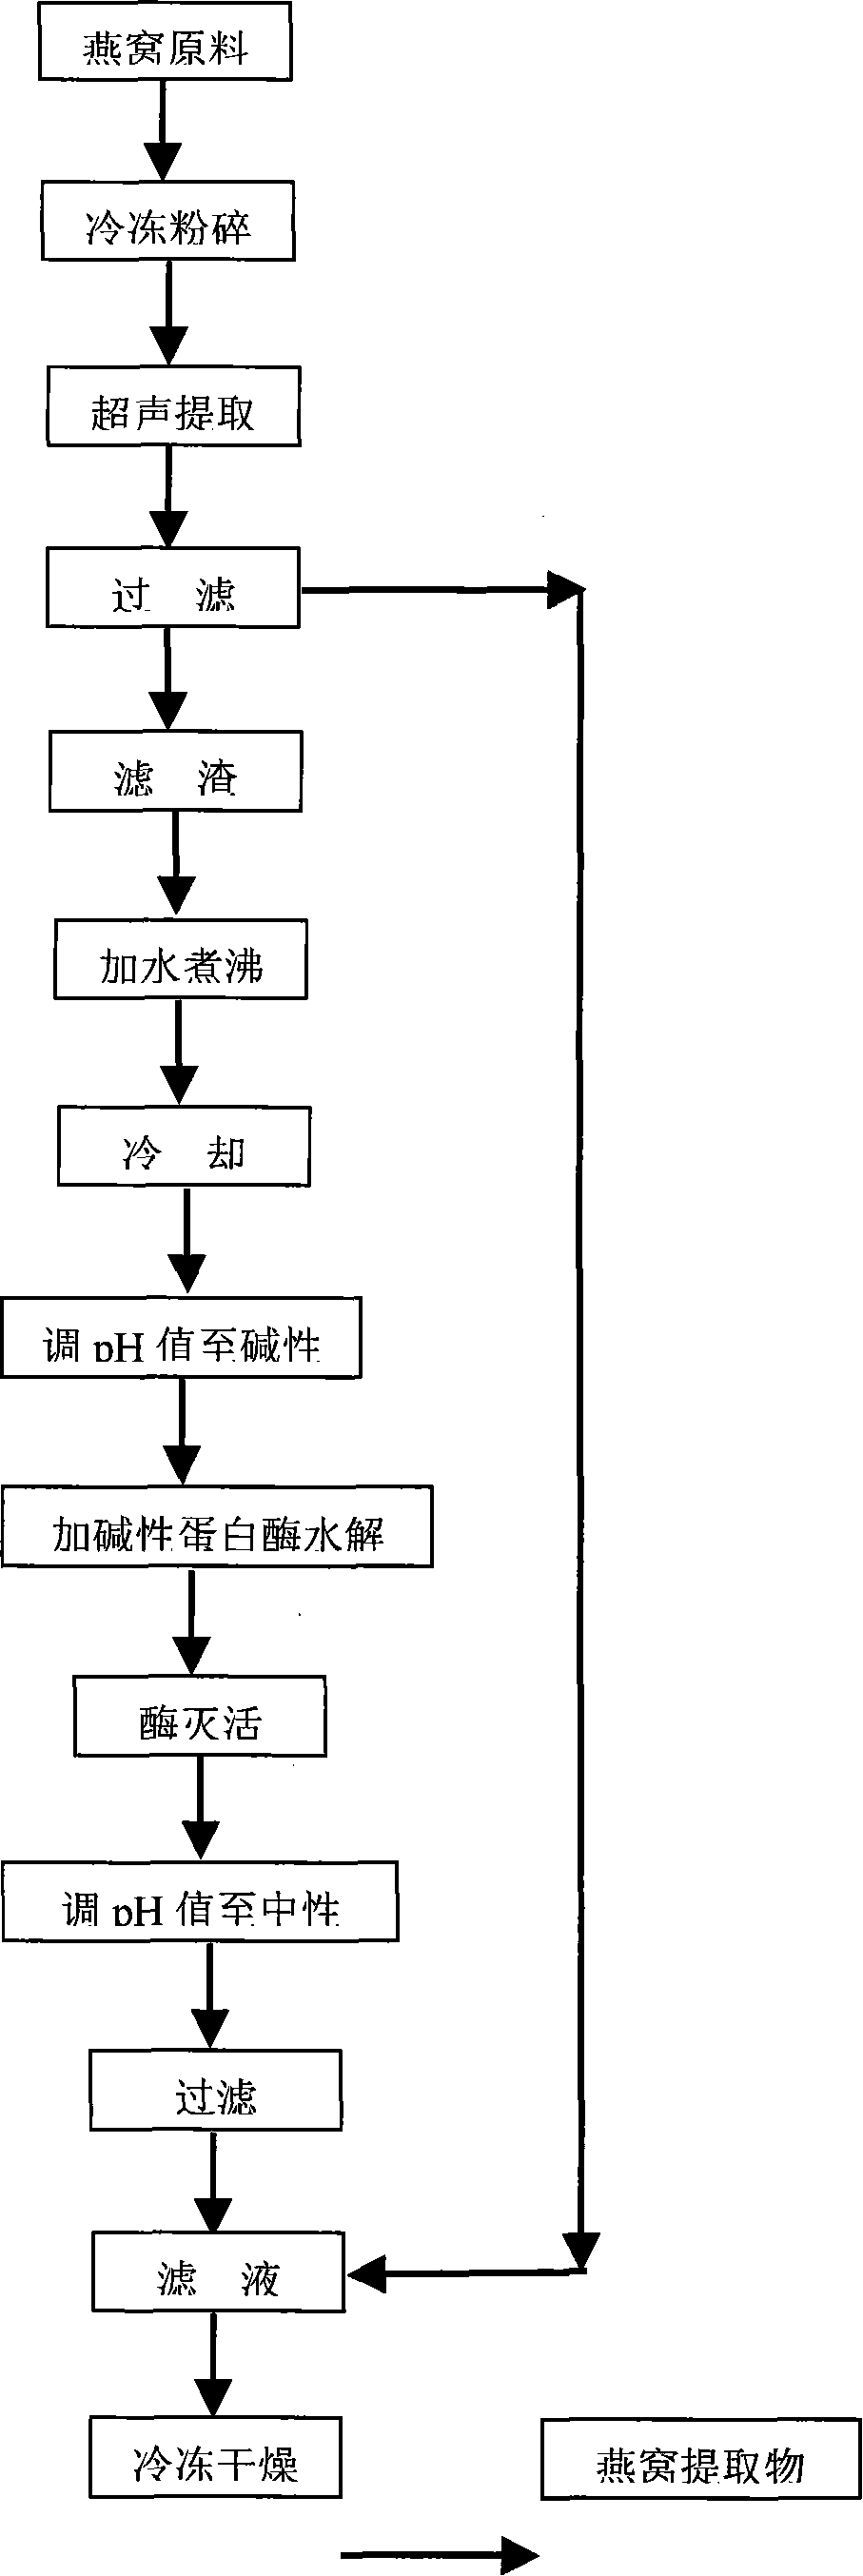 Process for preparing edible bird's nest extraction used for cosmetics